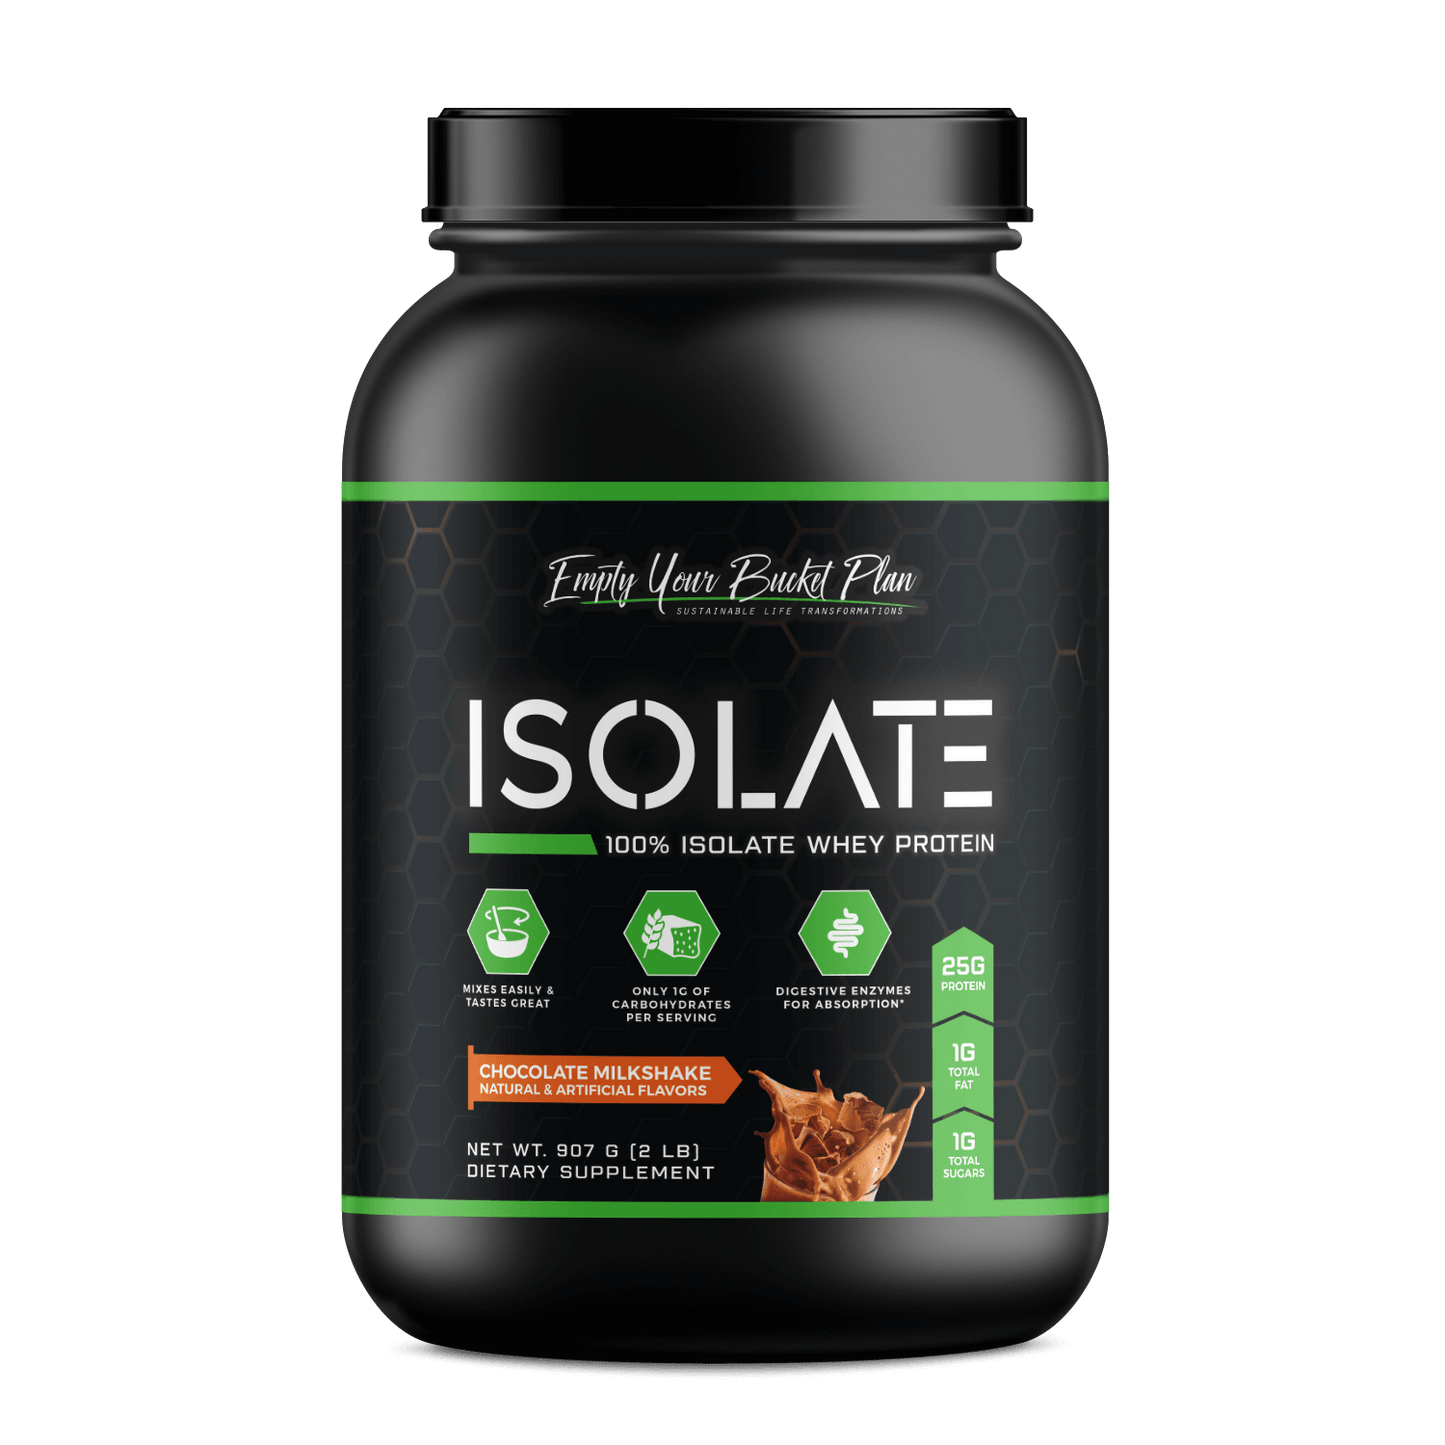 Isolate chocolate protein